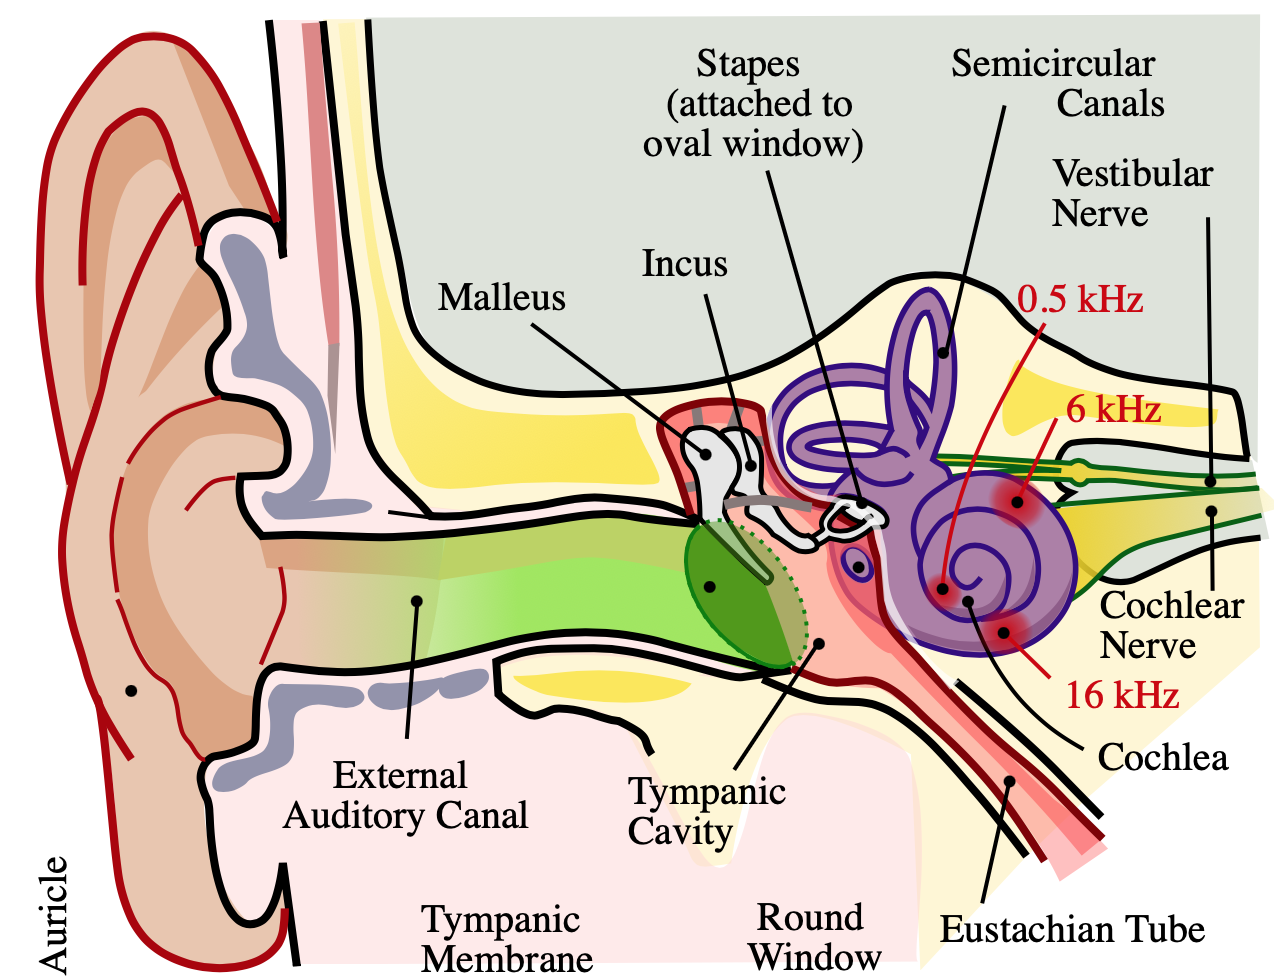 Anatomy of human ear showing differential frequencies from parts of the cochlea